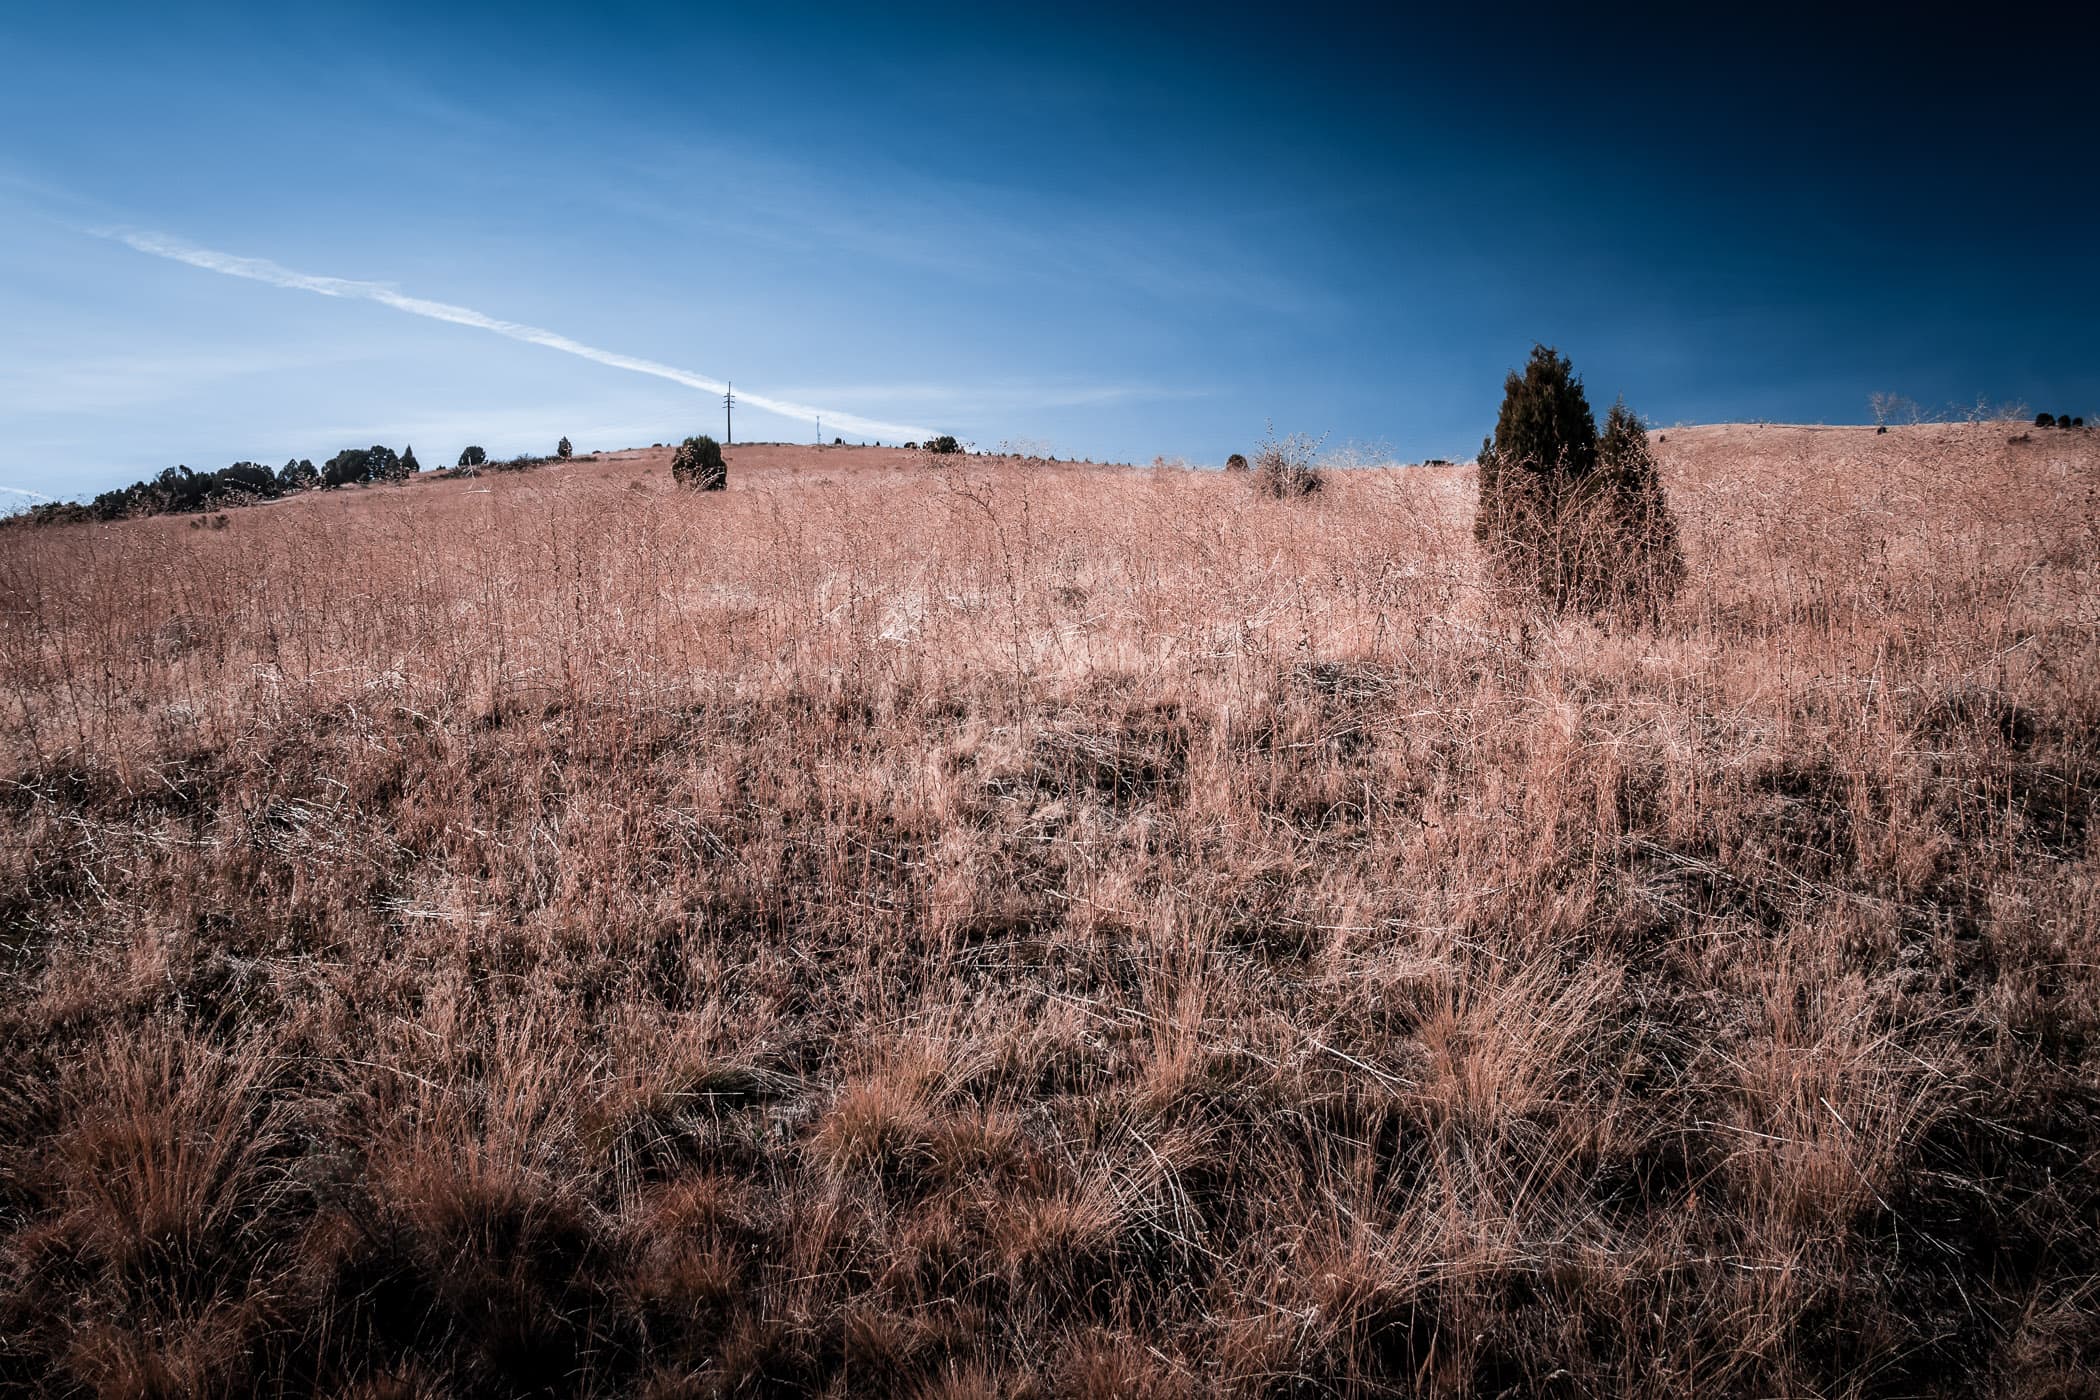 Tall grass grows on top of a hill on the outskirts of Pocatello, Idaho.